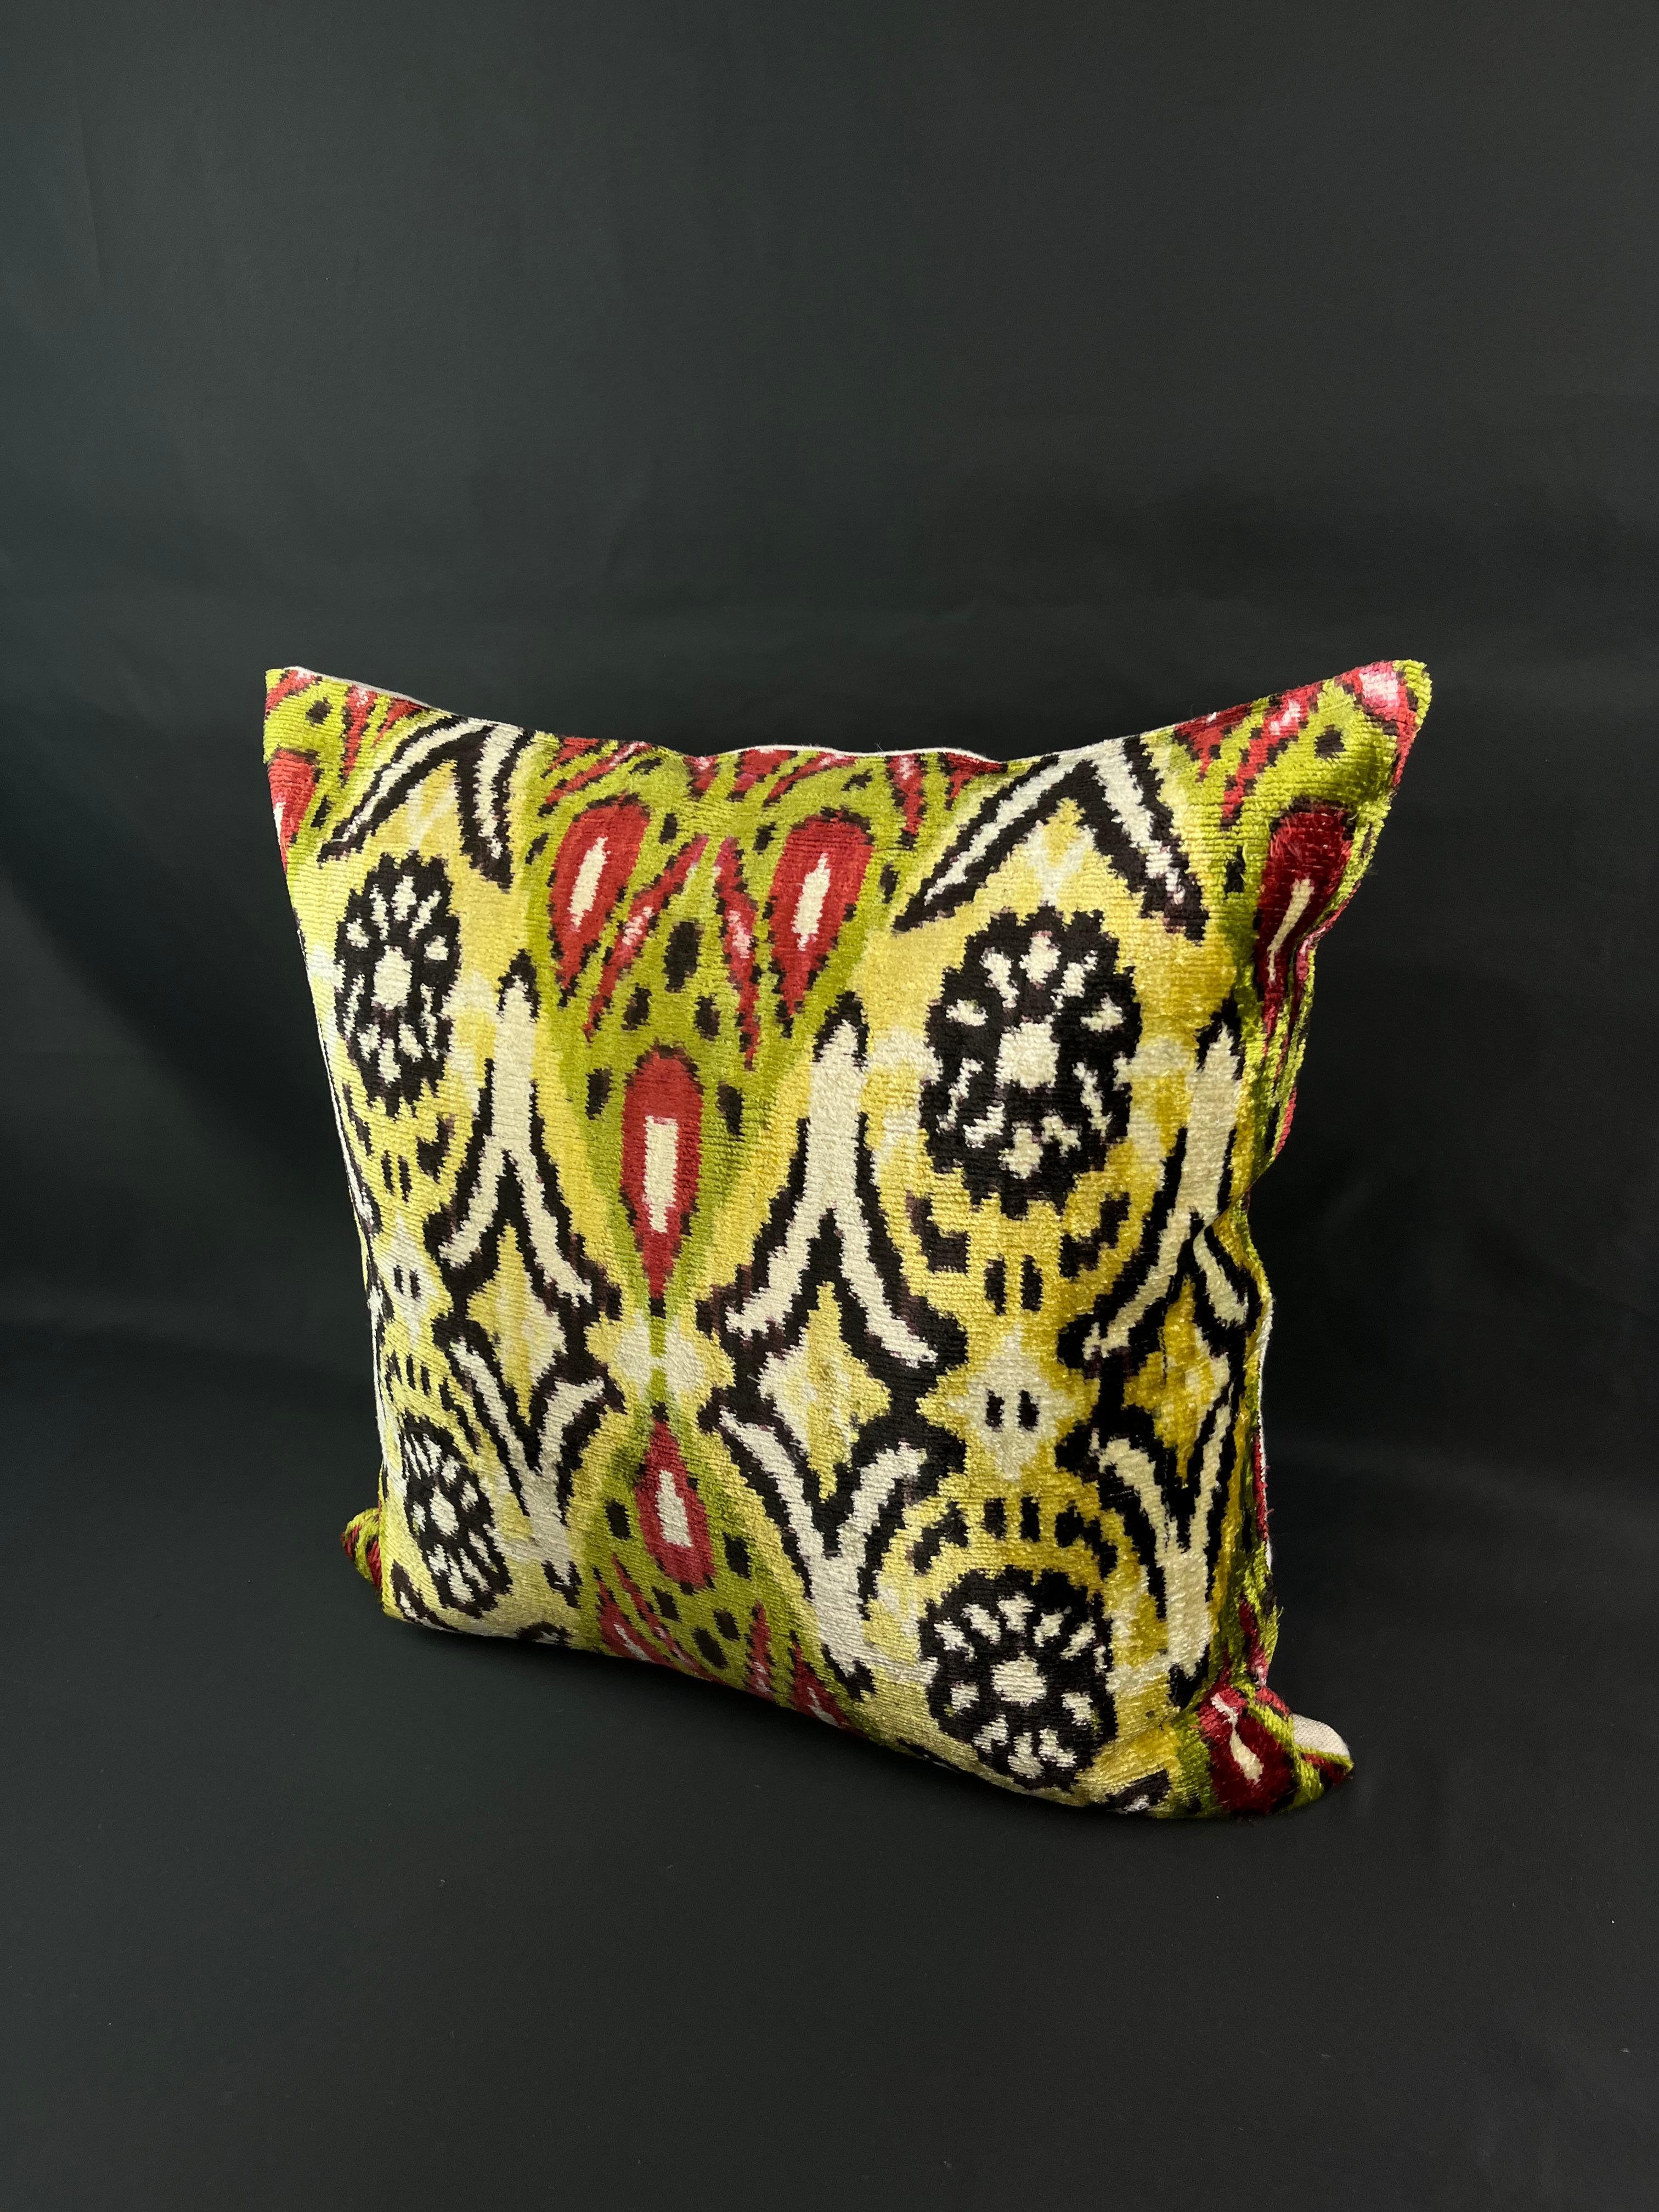 Introducing a stunning Turkish velvet ikat pillowcase, expertly handwoven from the finest silk and adorned with vibrant hand-dyed patterns. This exquisite pillowcase is a true work of art, crafted by skilled artisans using traditional techniques